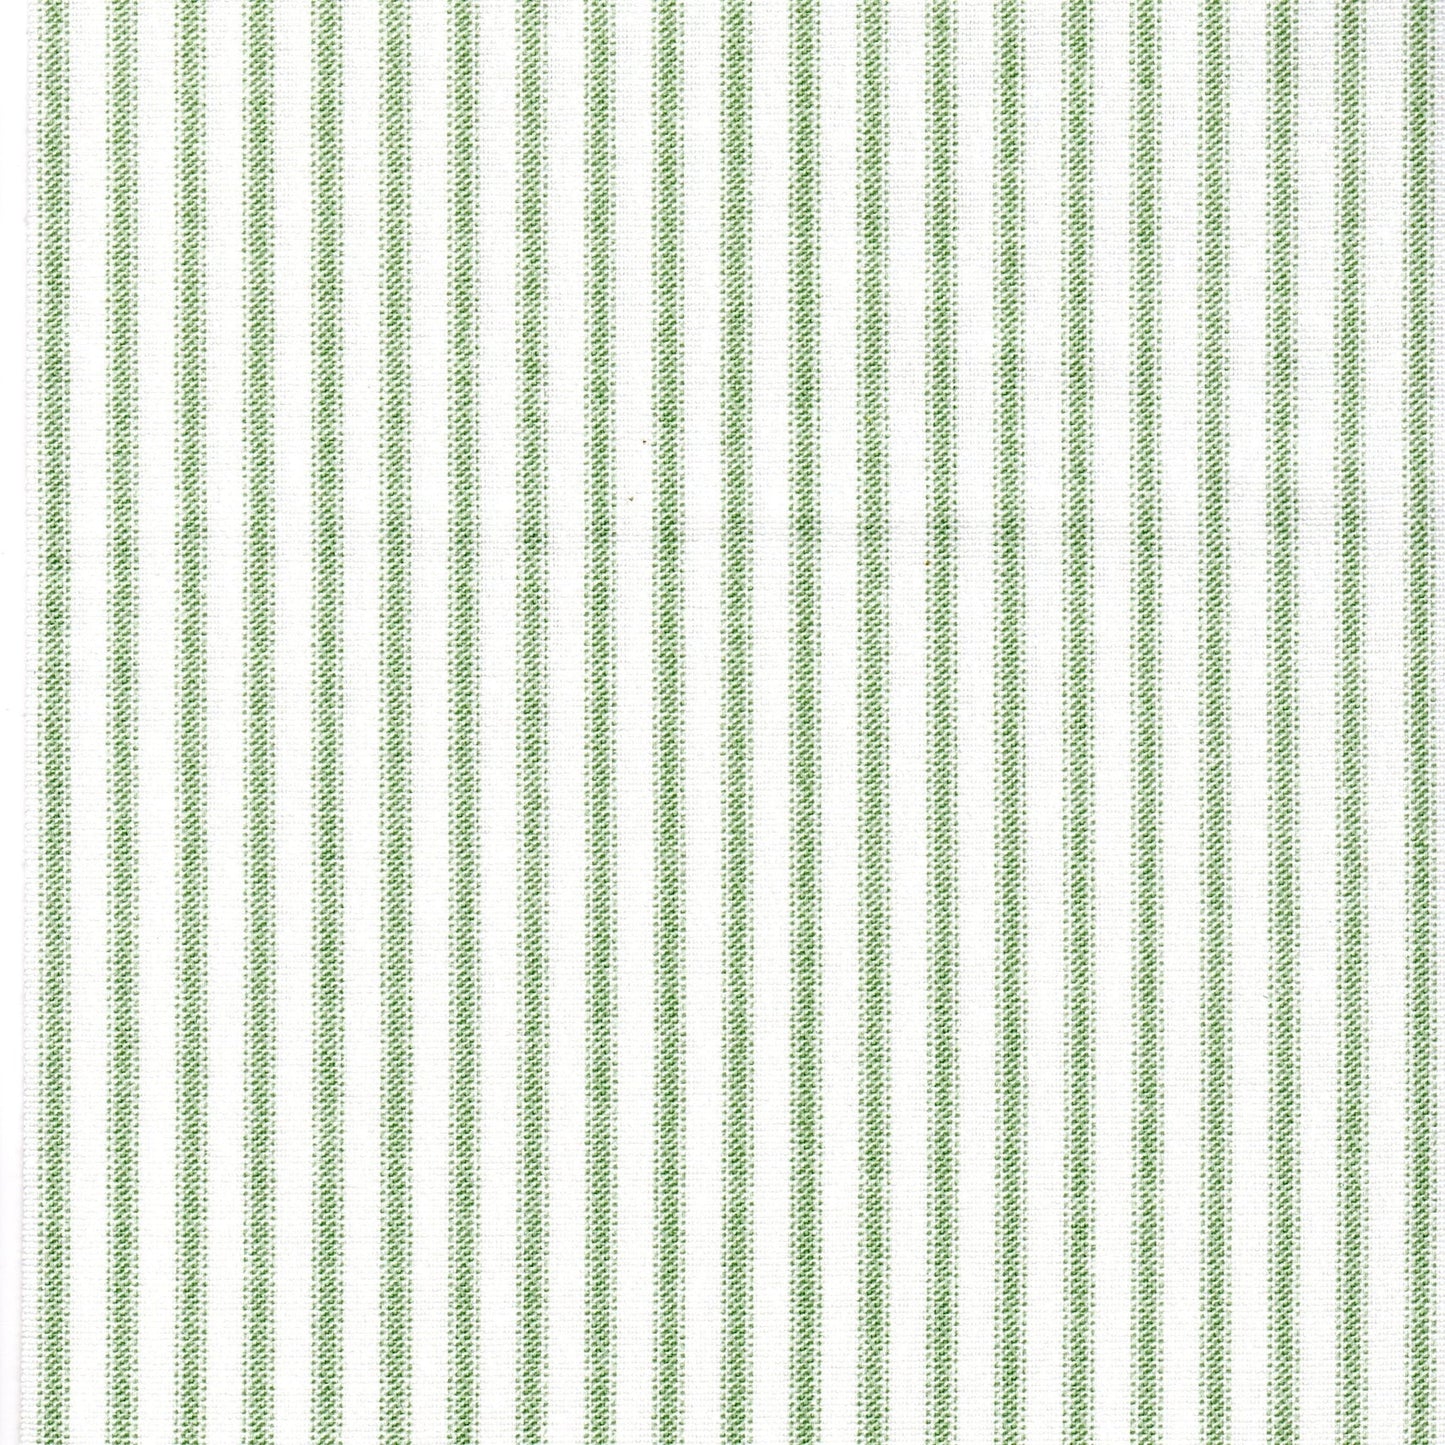 scallop valance in Classic Sage Green Ticking Stripe on White